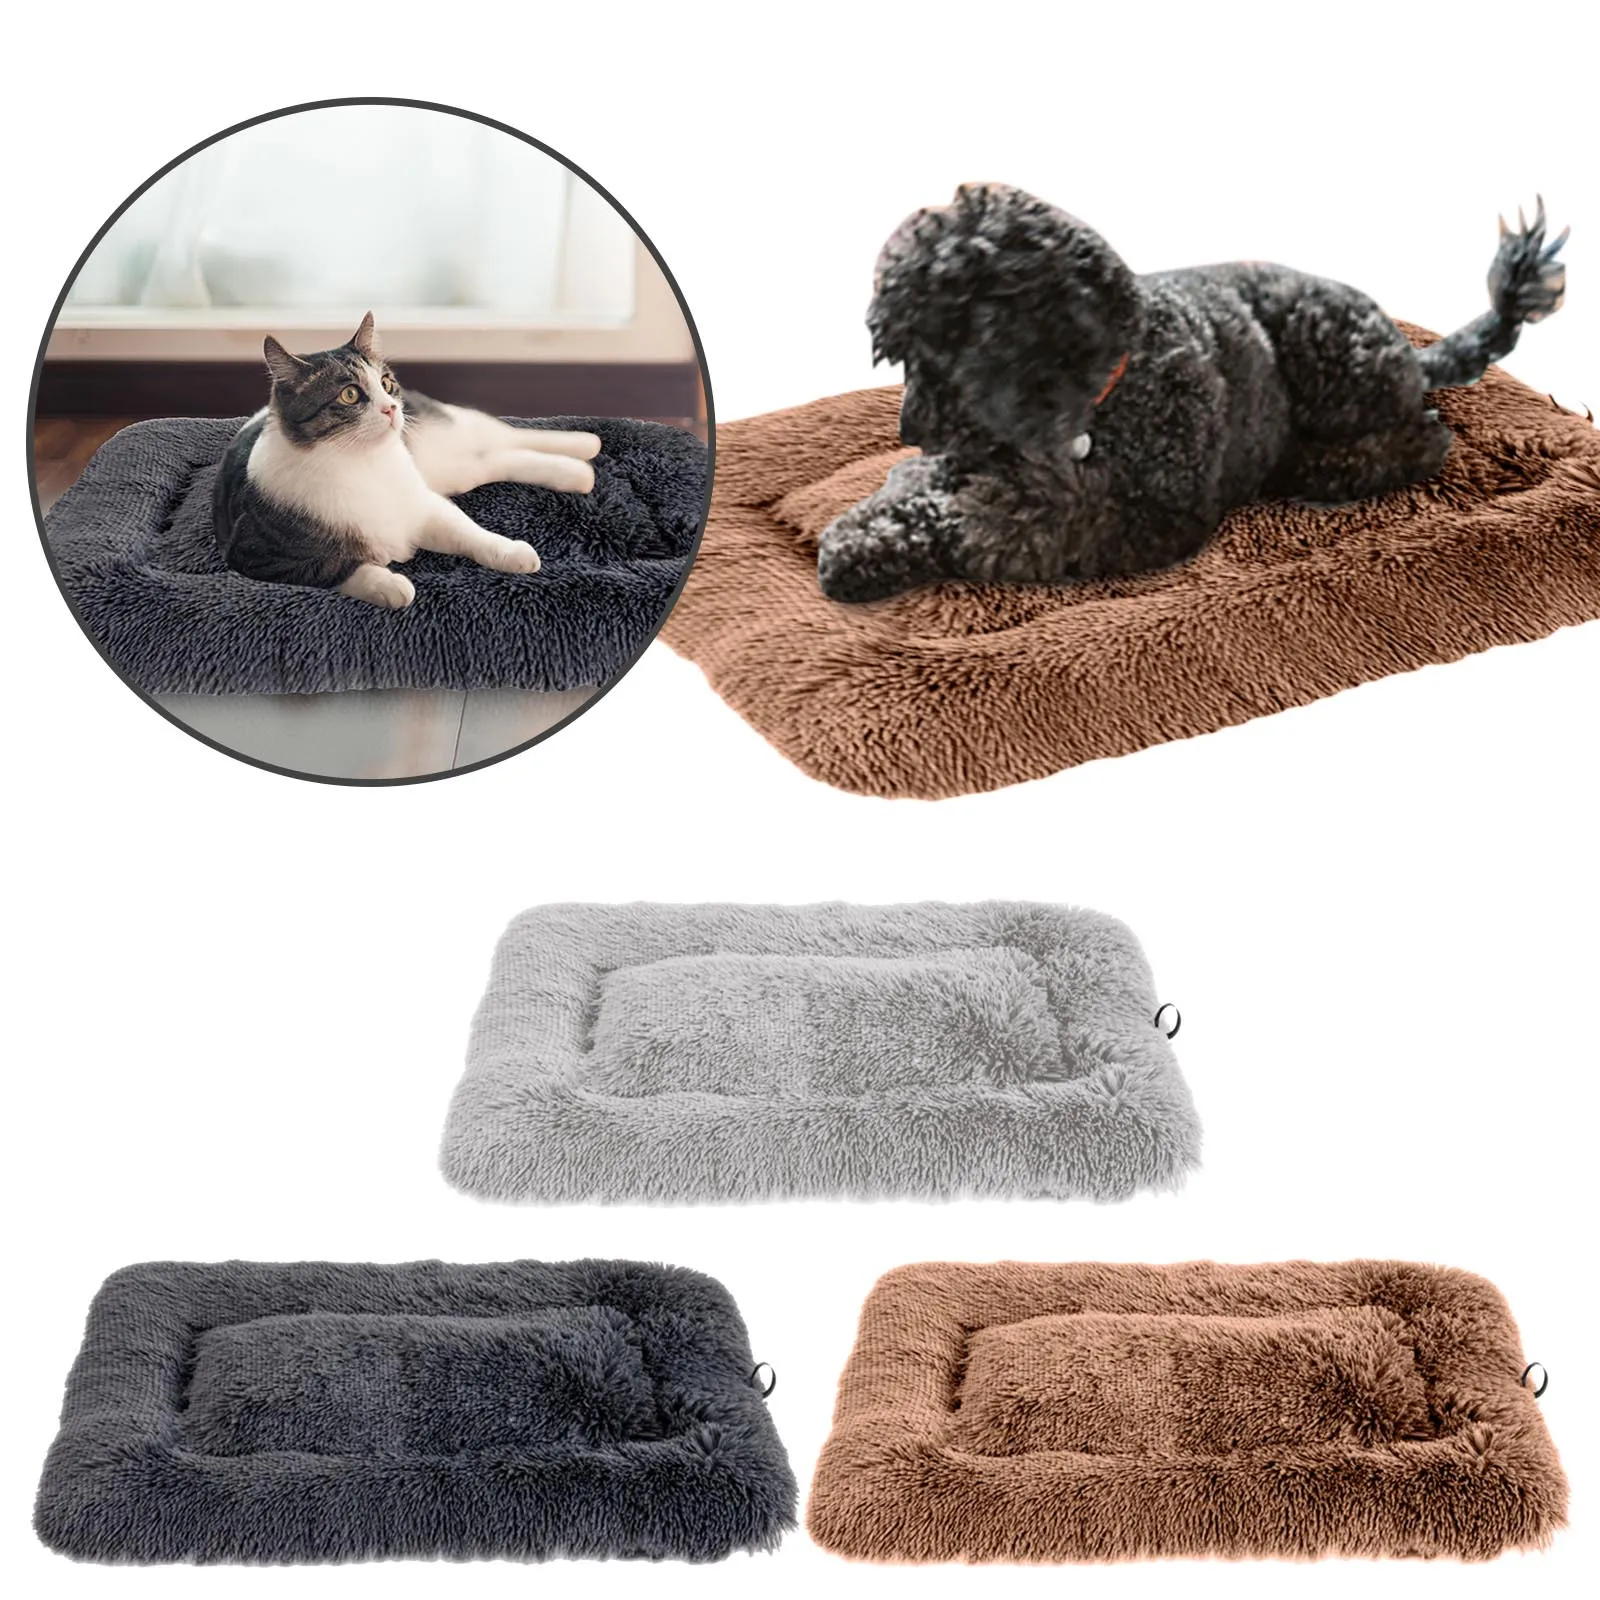 

Washable Dog Crate Mattress Calming Fluffy Anxiety Dog Beds Deluxe Plush Dog Mat With Slip Bottom Small Dog Bed